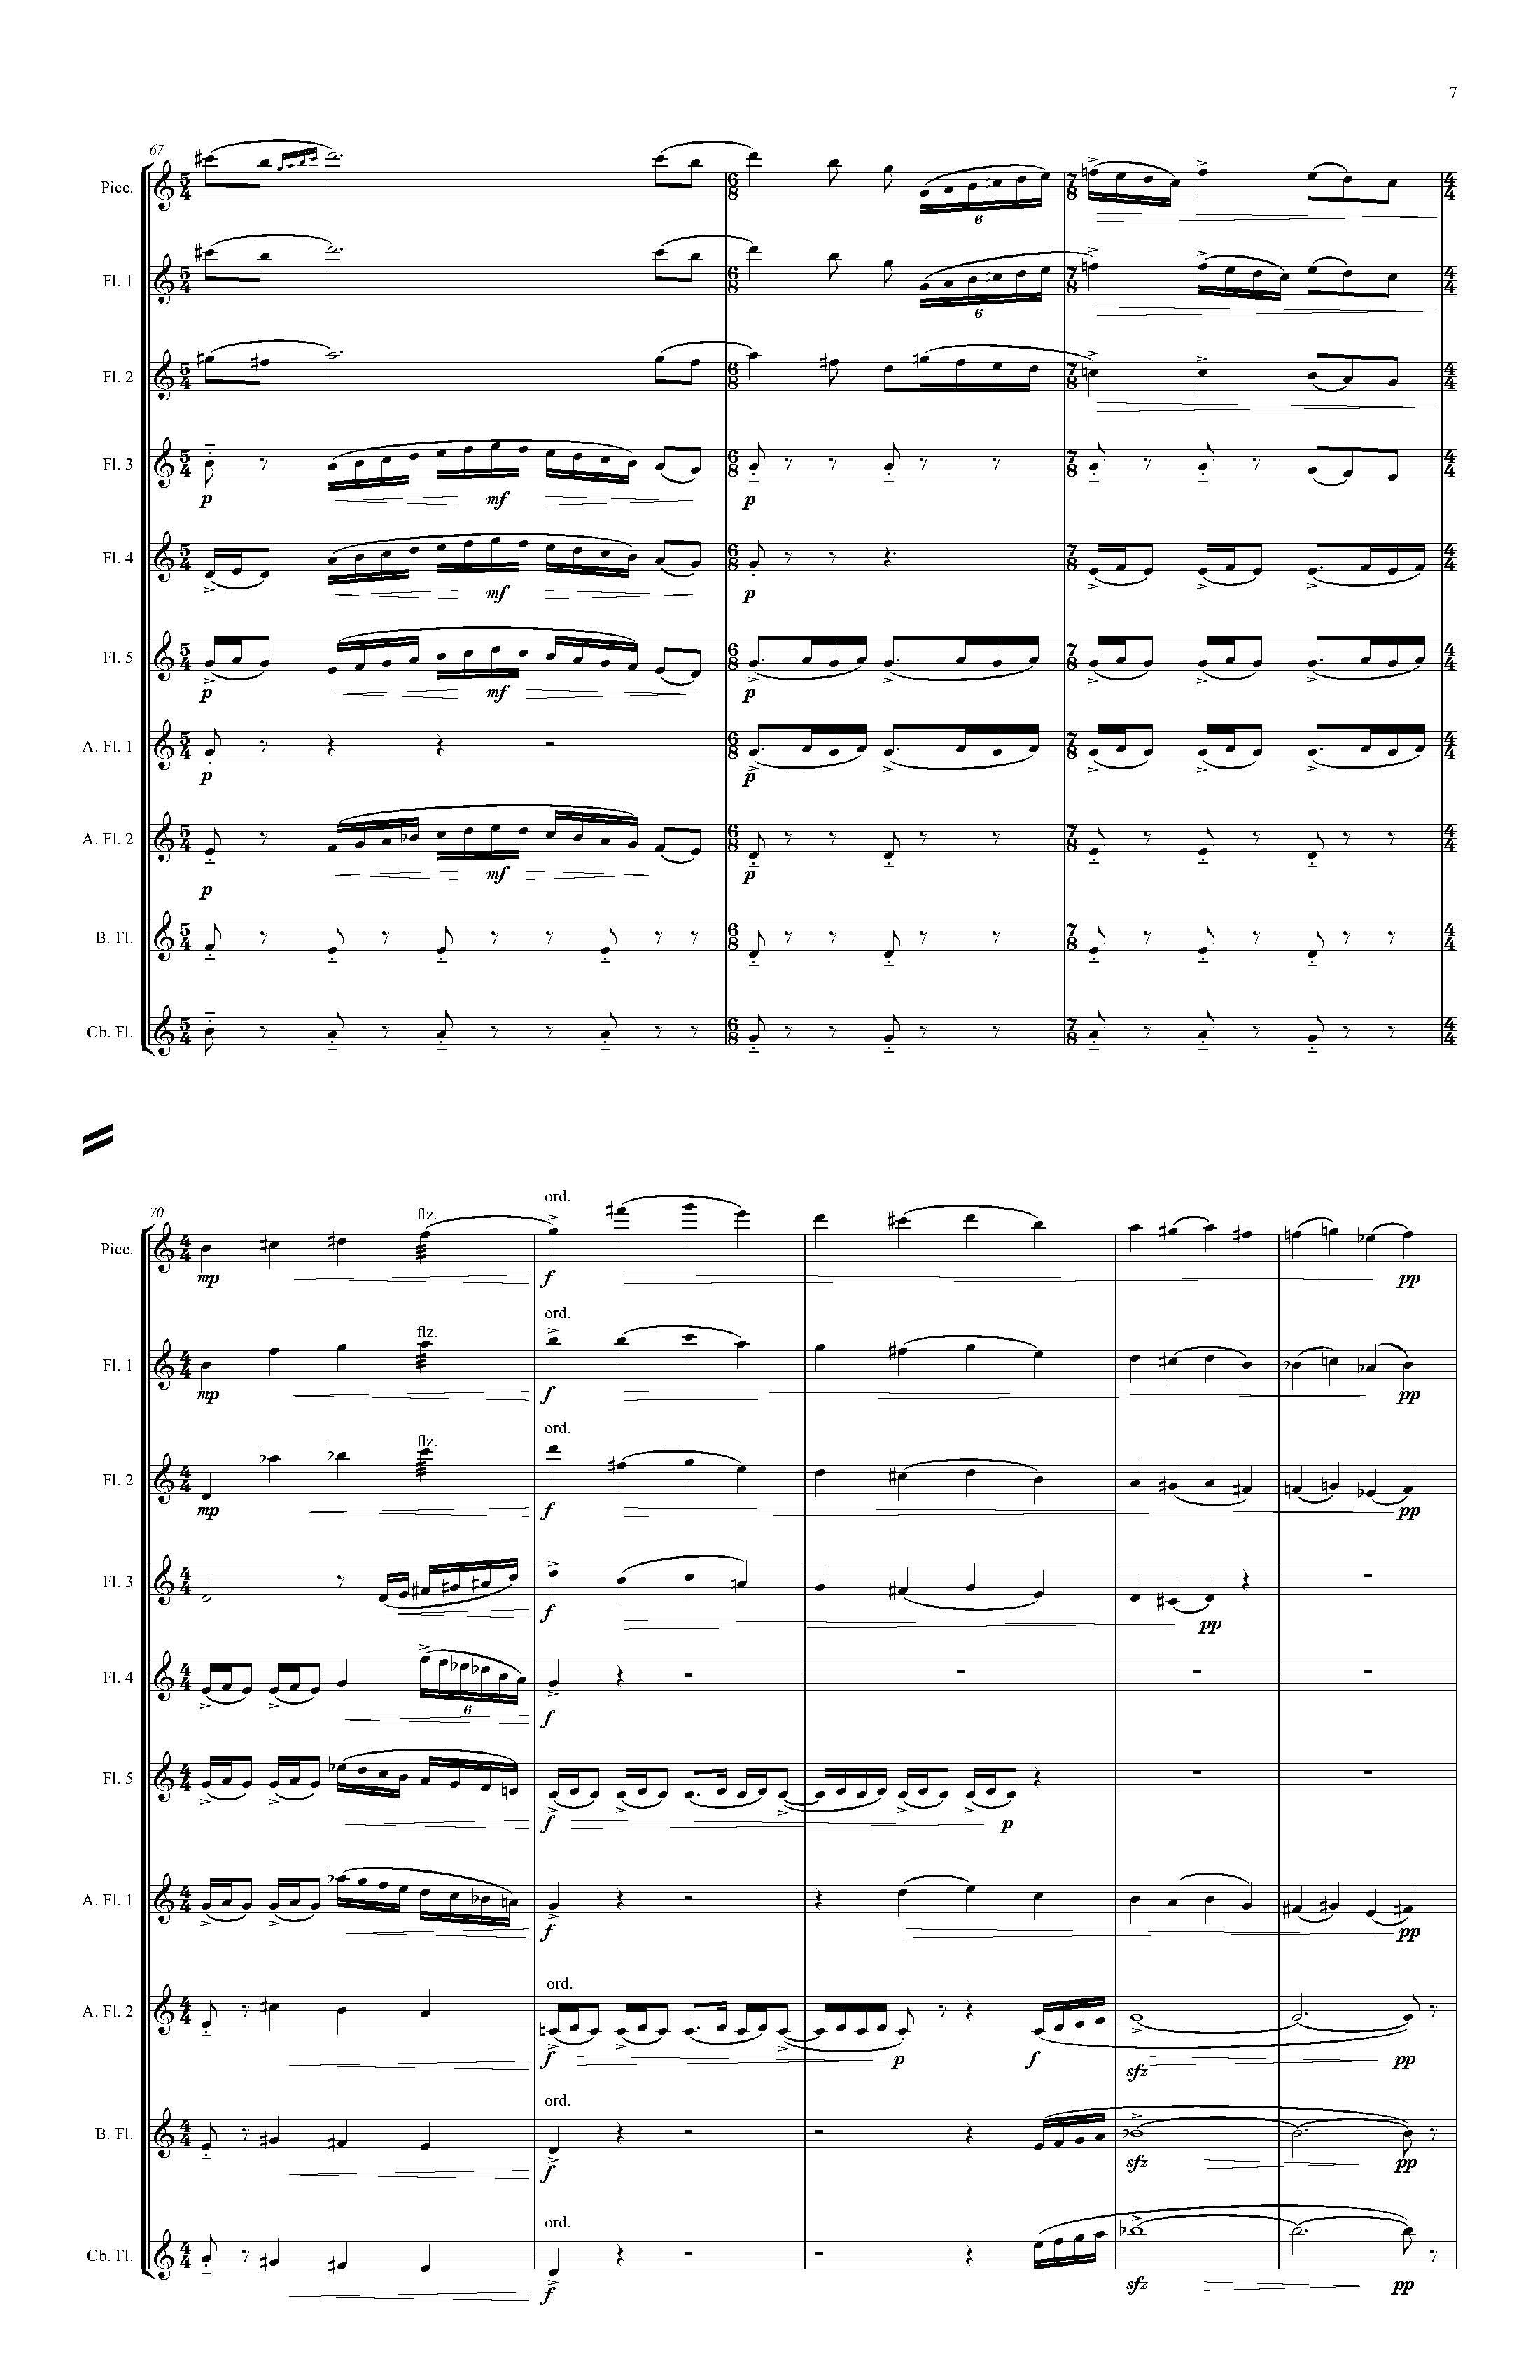 PIPES - Complete Score_Page_13.jpg